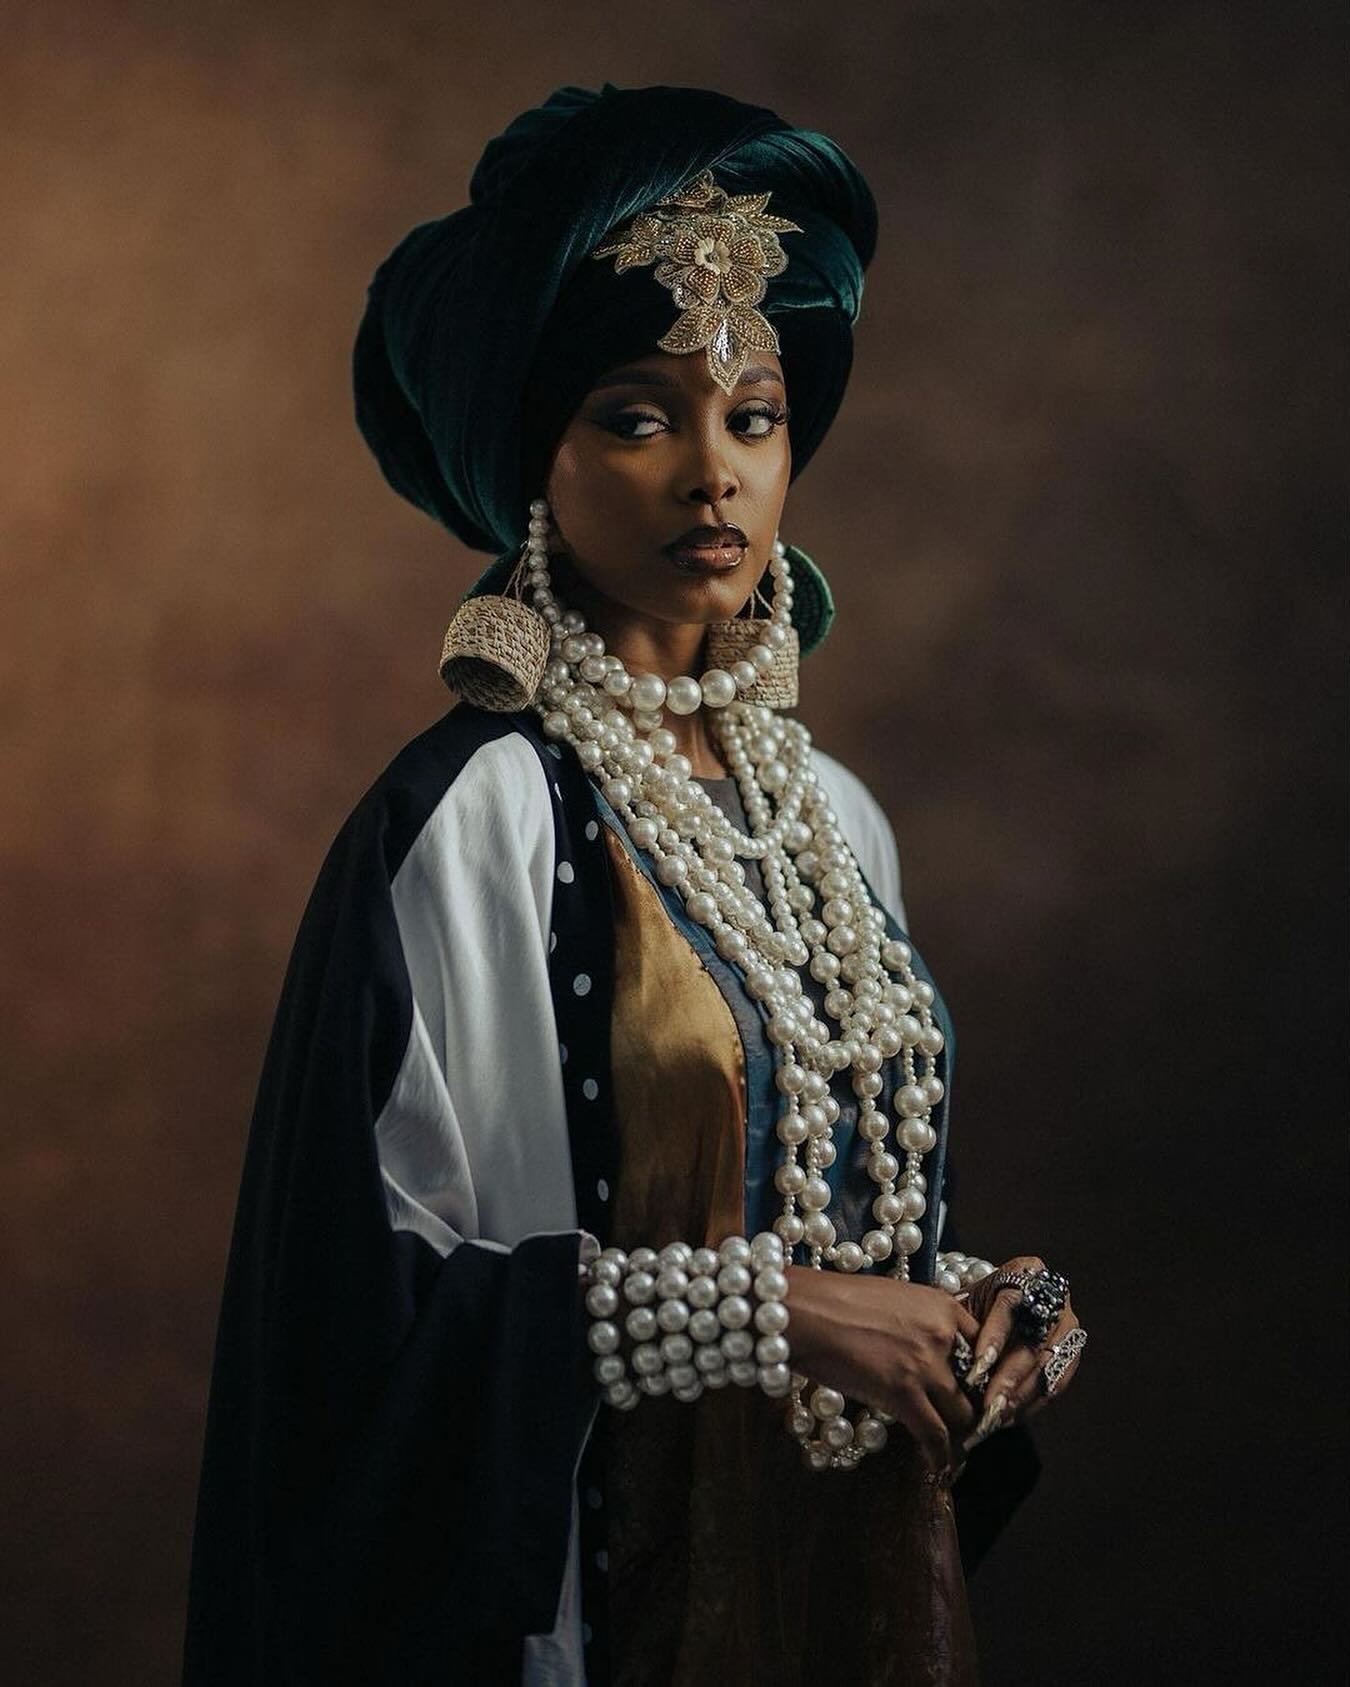 Regal personified in turban and pearls. &mdash;&mdash;&mdash;&mdash;&mdash;&mdash;&mdash;&mdash;&mdash;&mdash;&mdash;&mdash;&mdash;&mdash;&mdash;&mdash;&mdash;&mdash;&mdash;&mdash;&mdash;&mdash;&mdash;&mdash;🔘👑🔘👑🔘👑🔘👑🔘👑🔘👑🔘👑&mdash;&mdash;